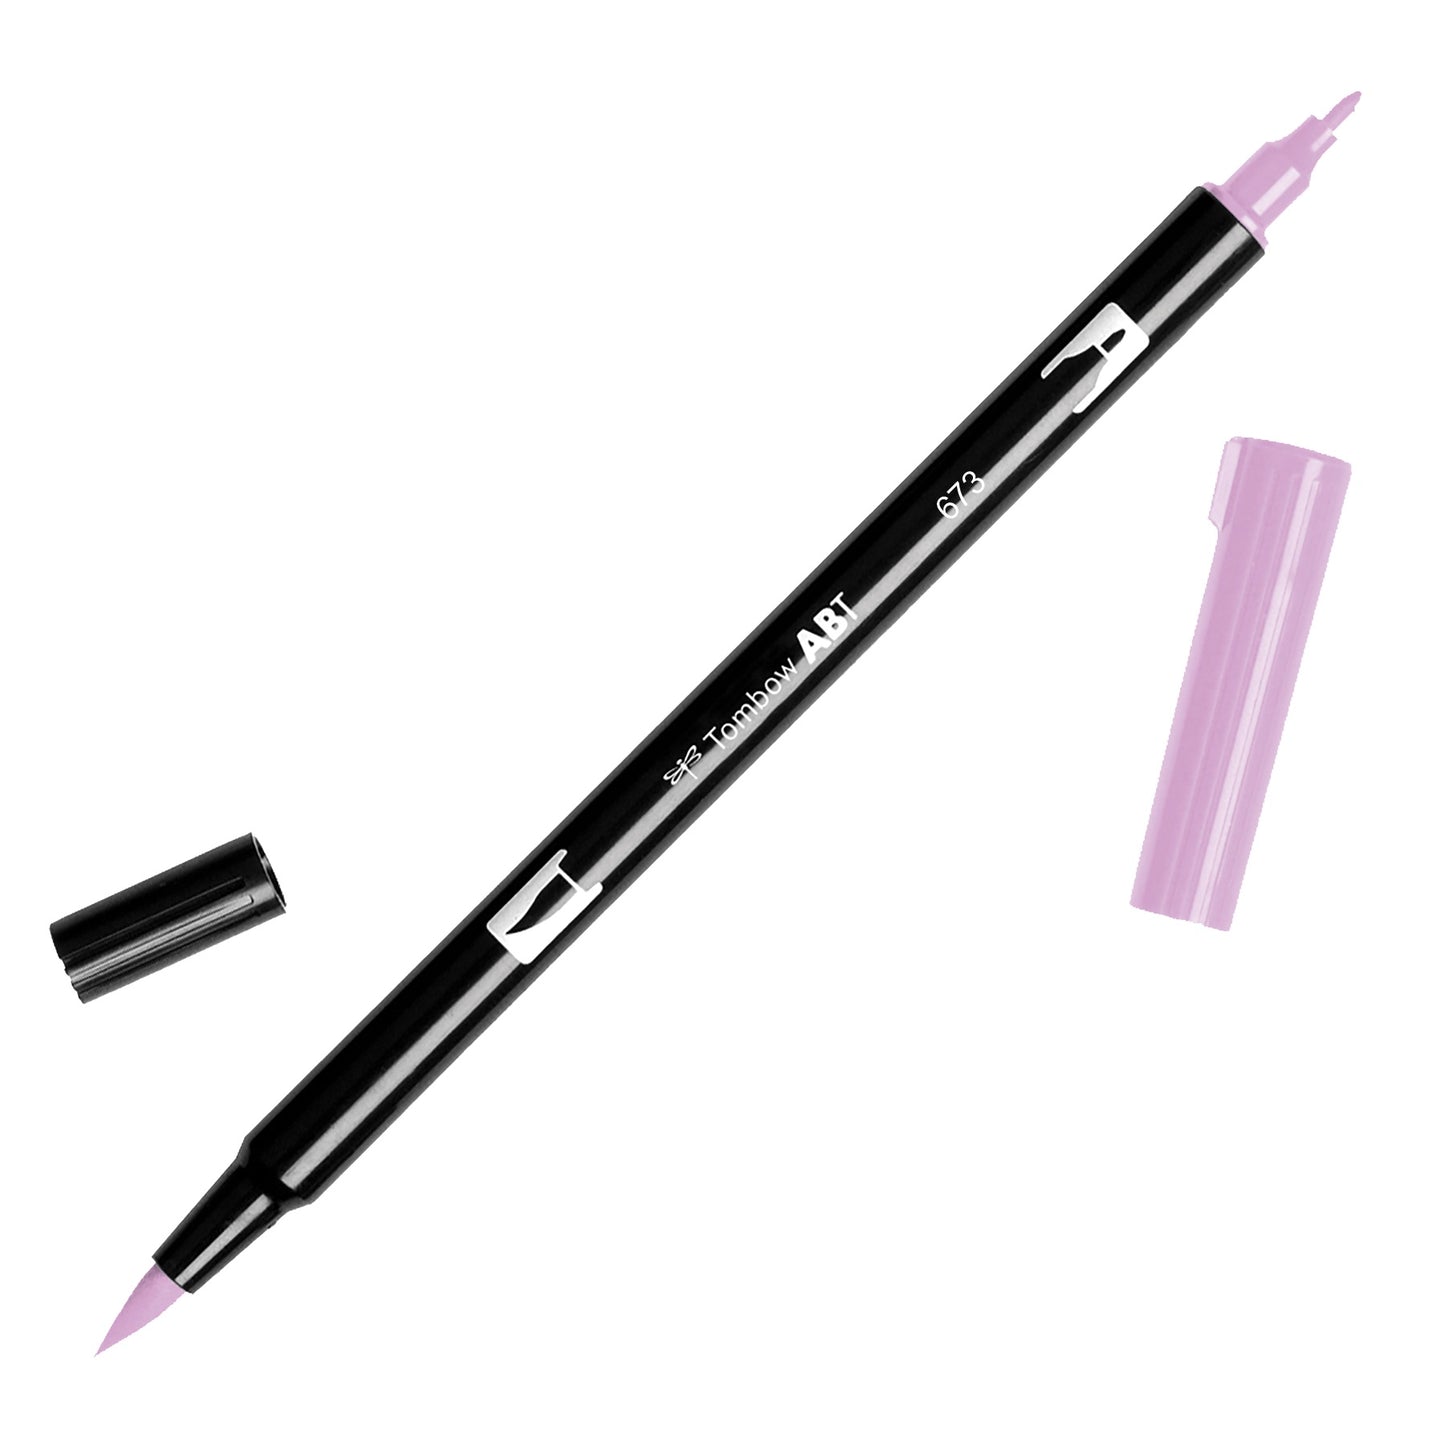 TOMBOW 673 ORCHID DUAL BRUSH MARKER